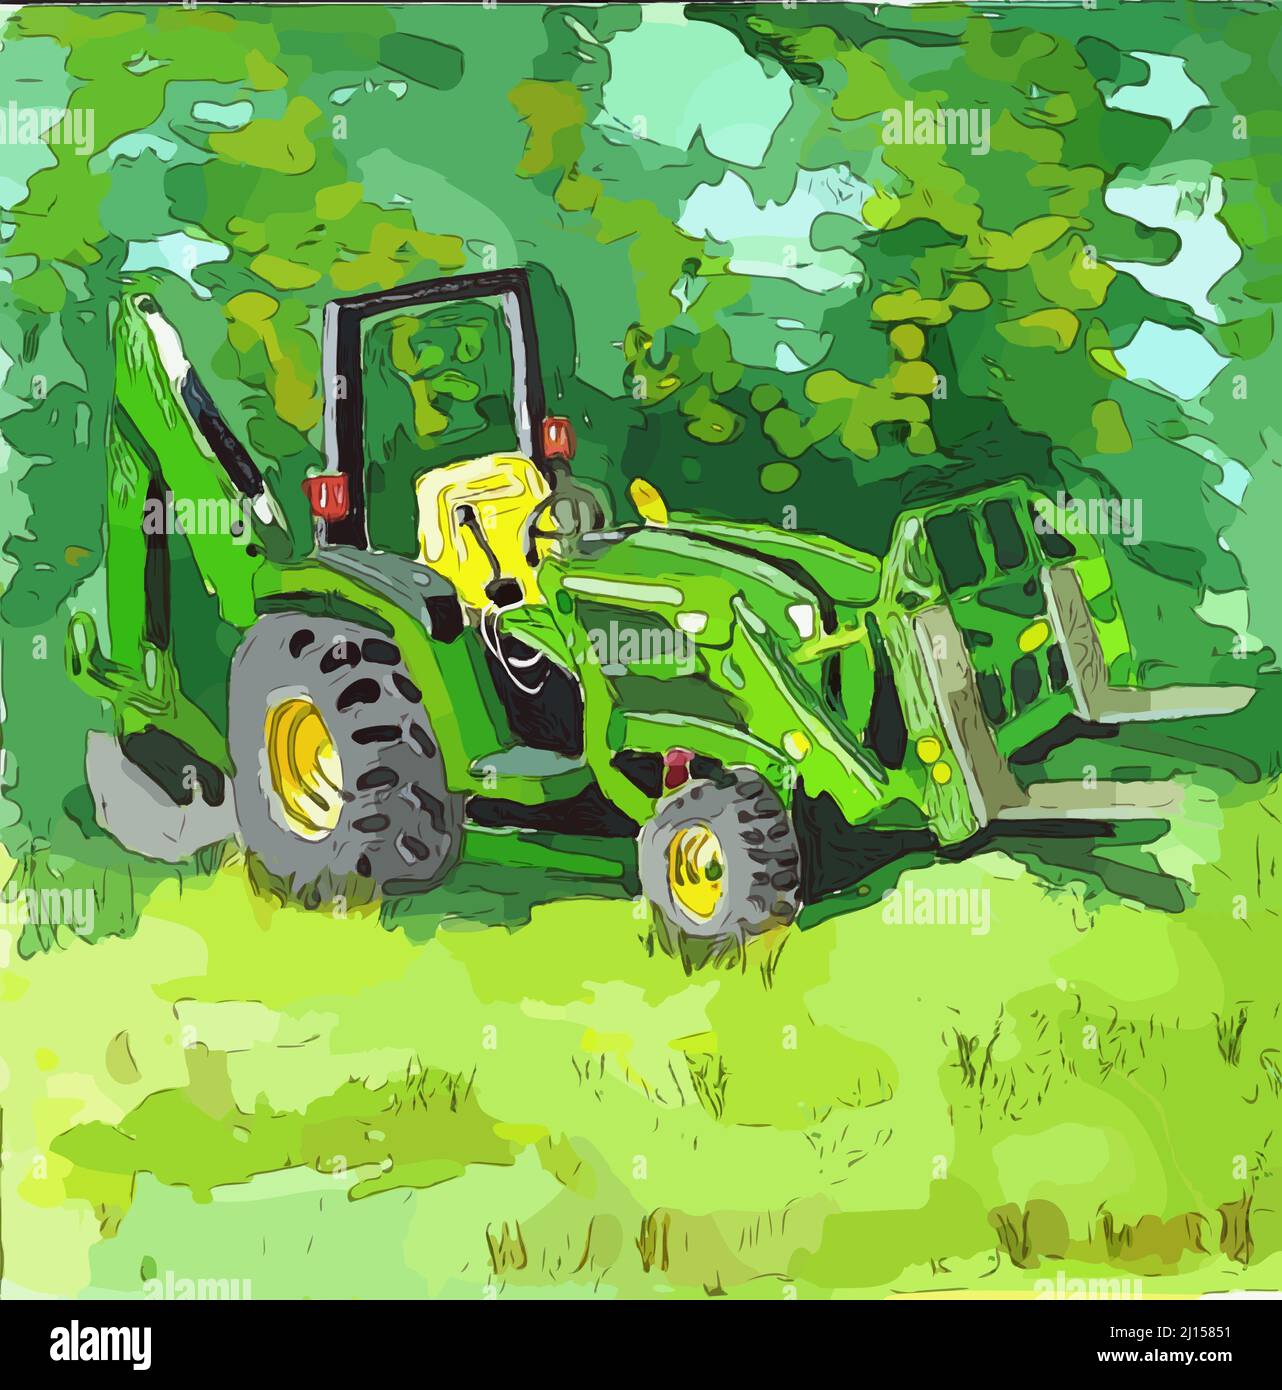 Illustration of a tractor Stock Photo